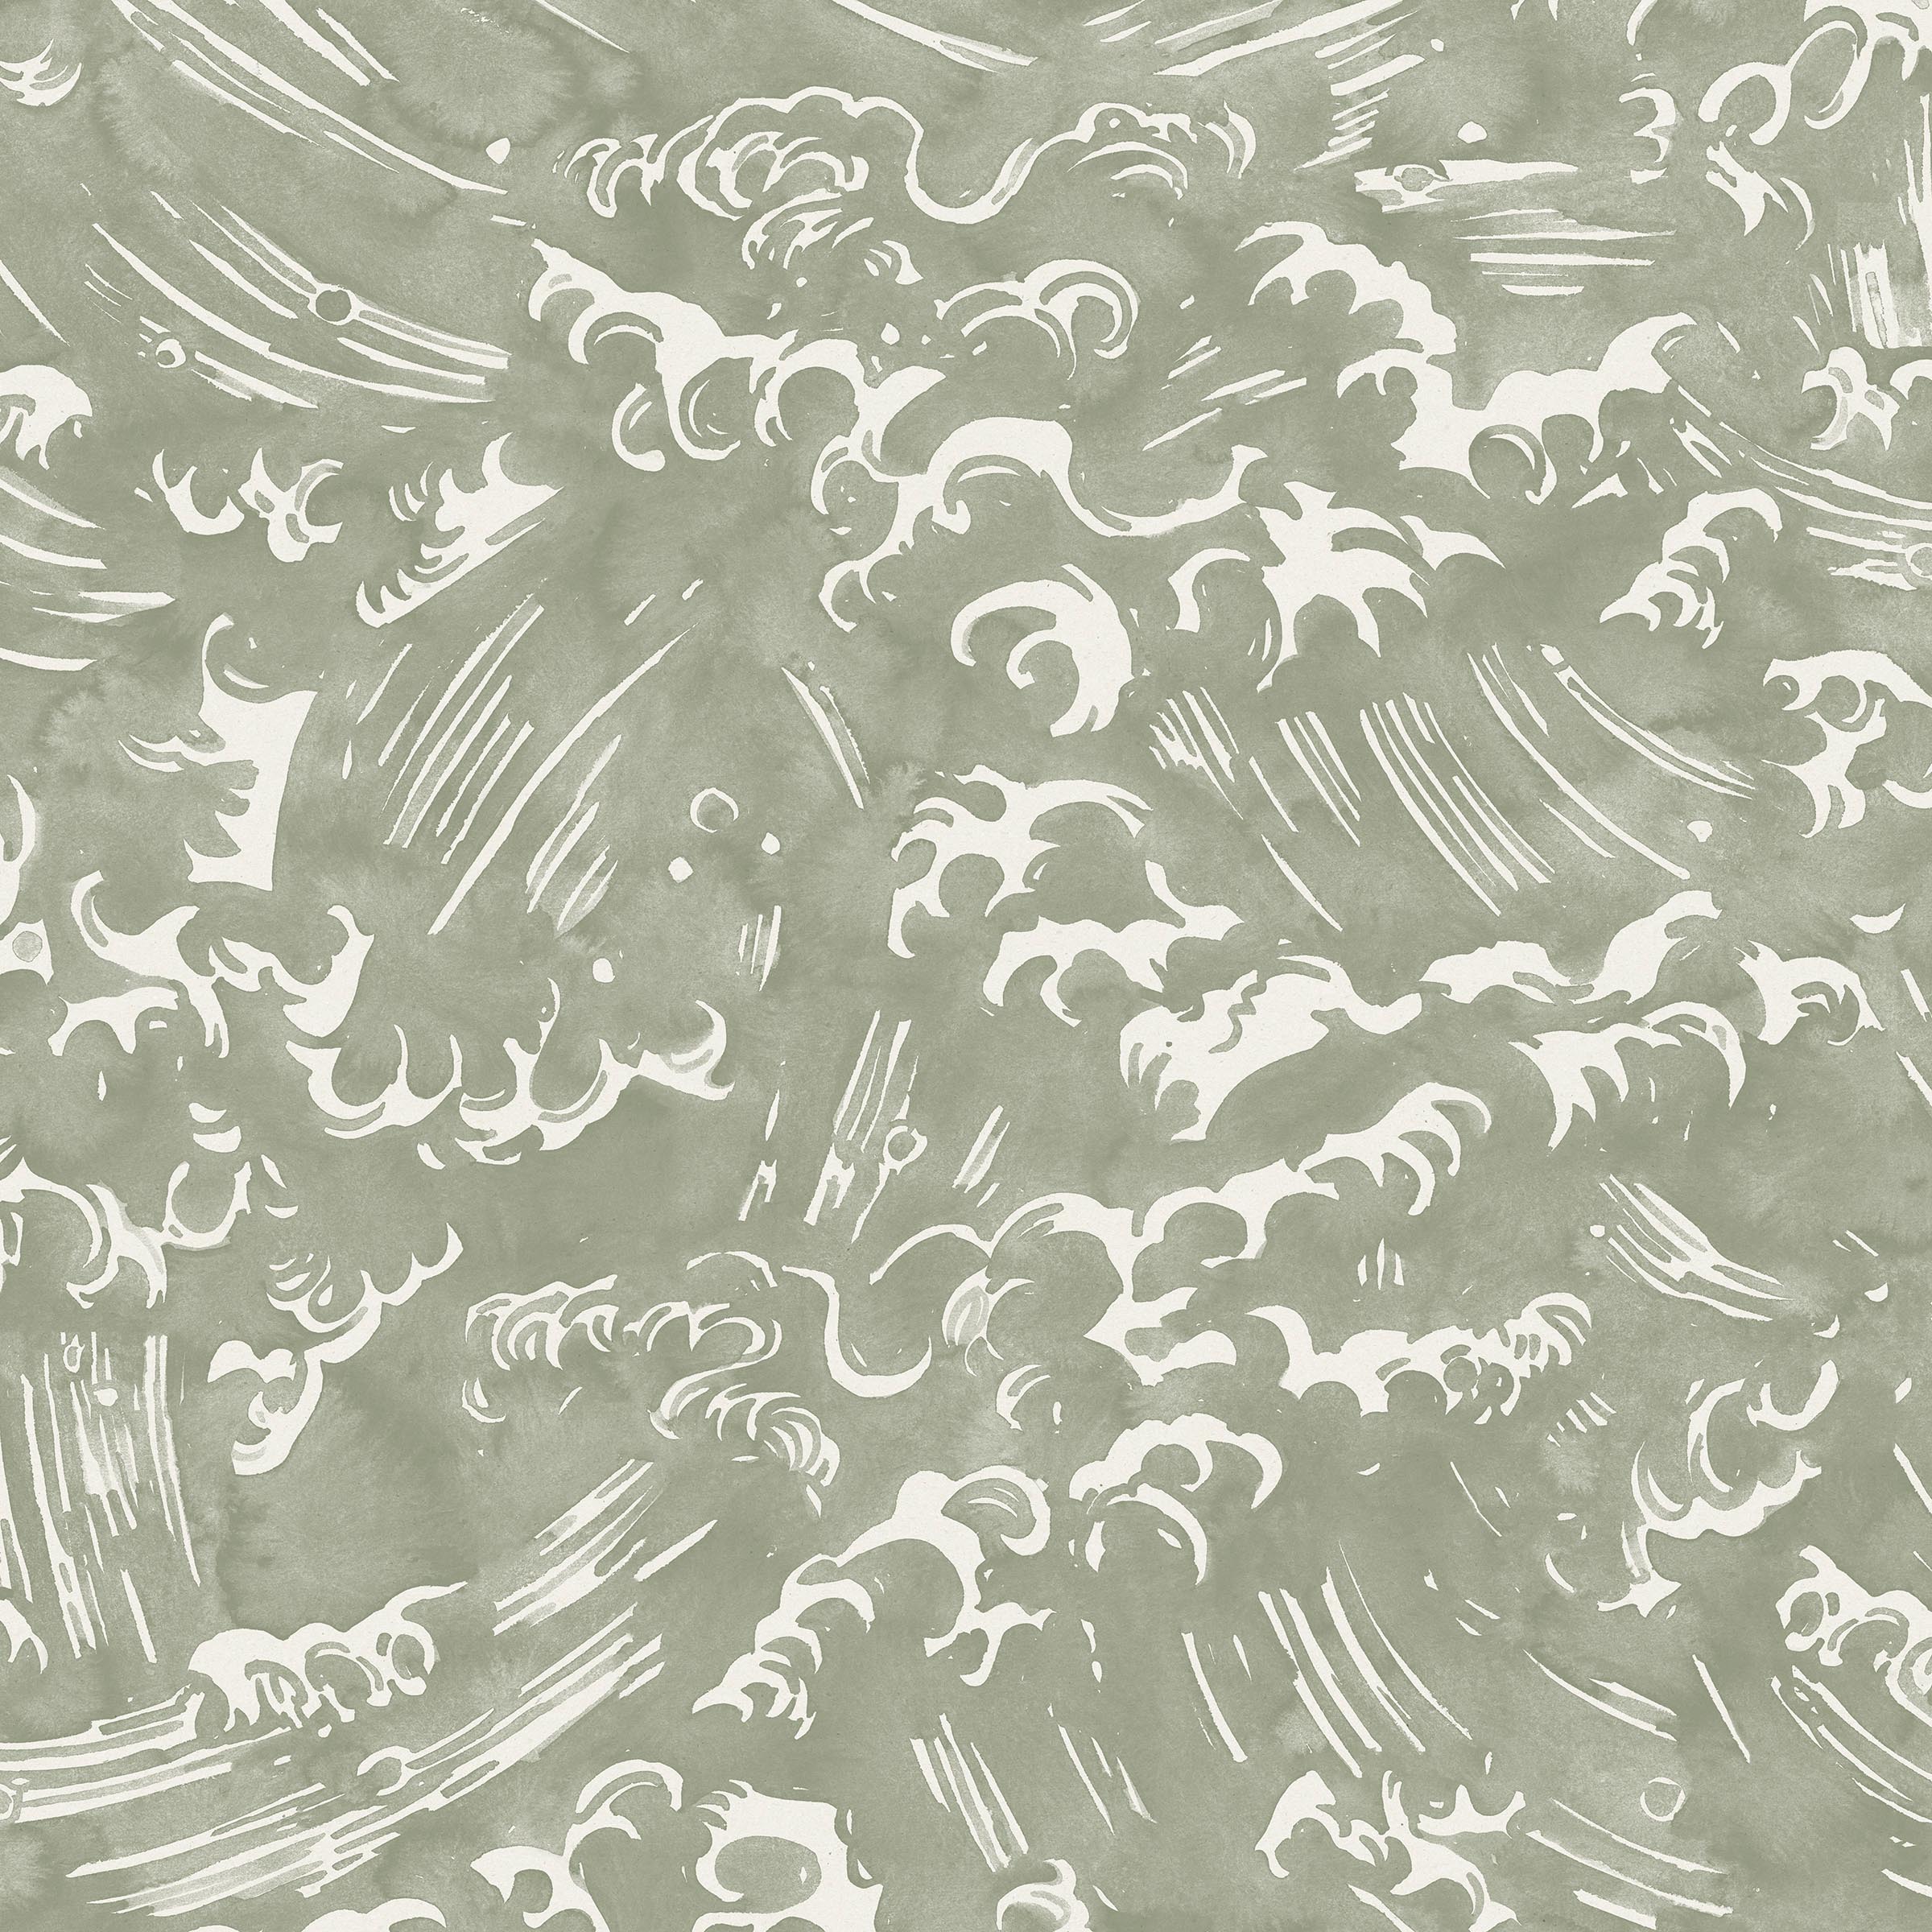 Detail of wallpaper in a playful wave print in white on a sage watercolor field.